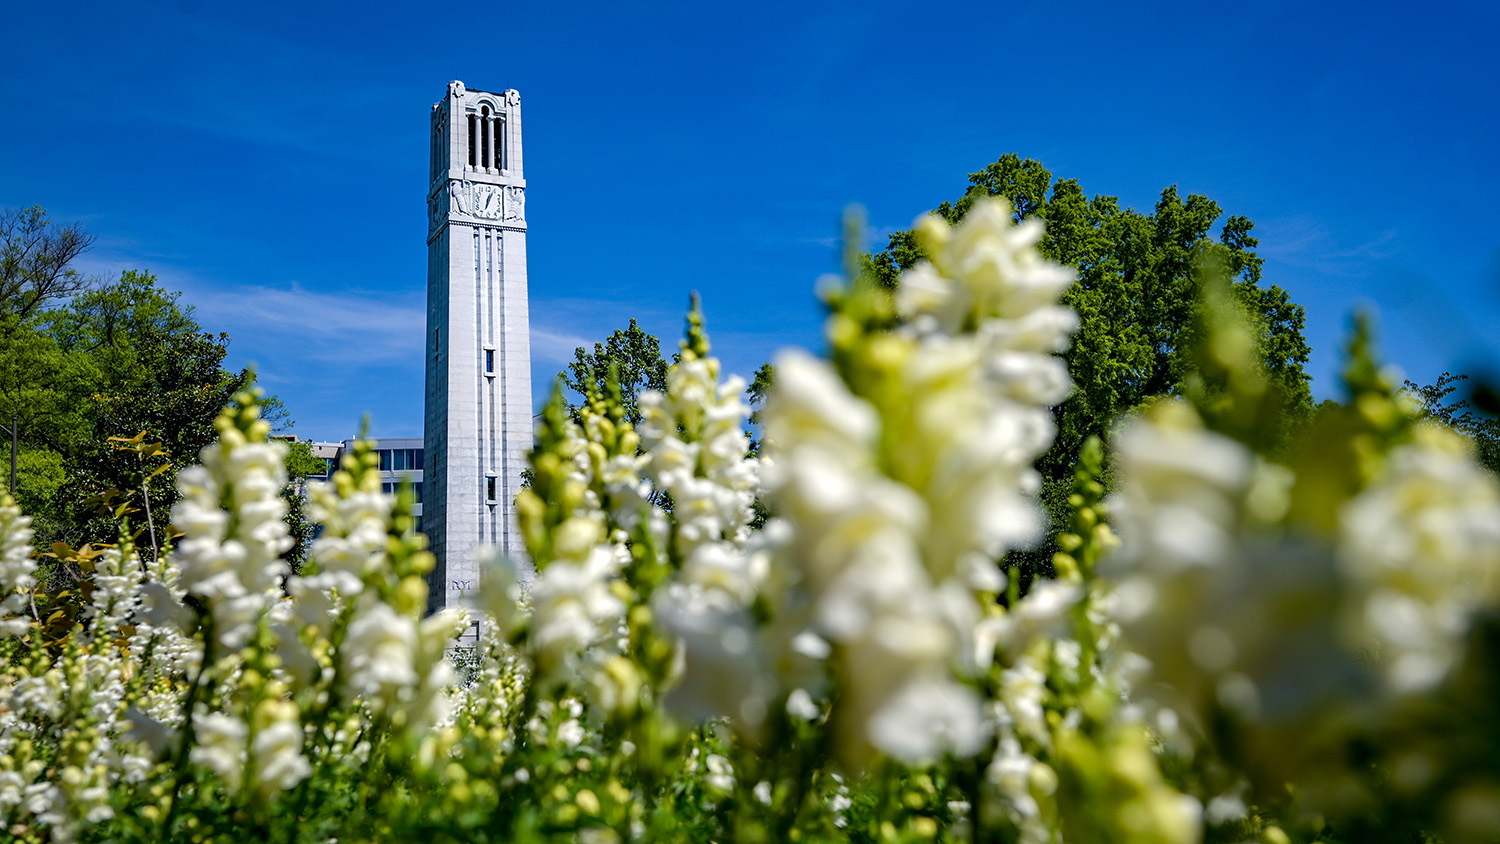 NC State Belltower in front of blue sky and behind blooming white flowers.